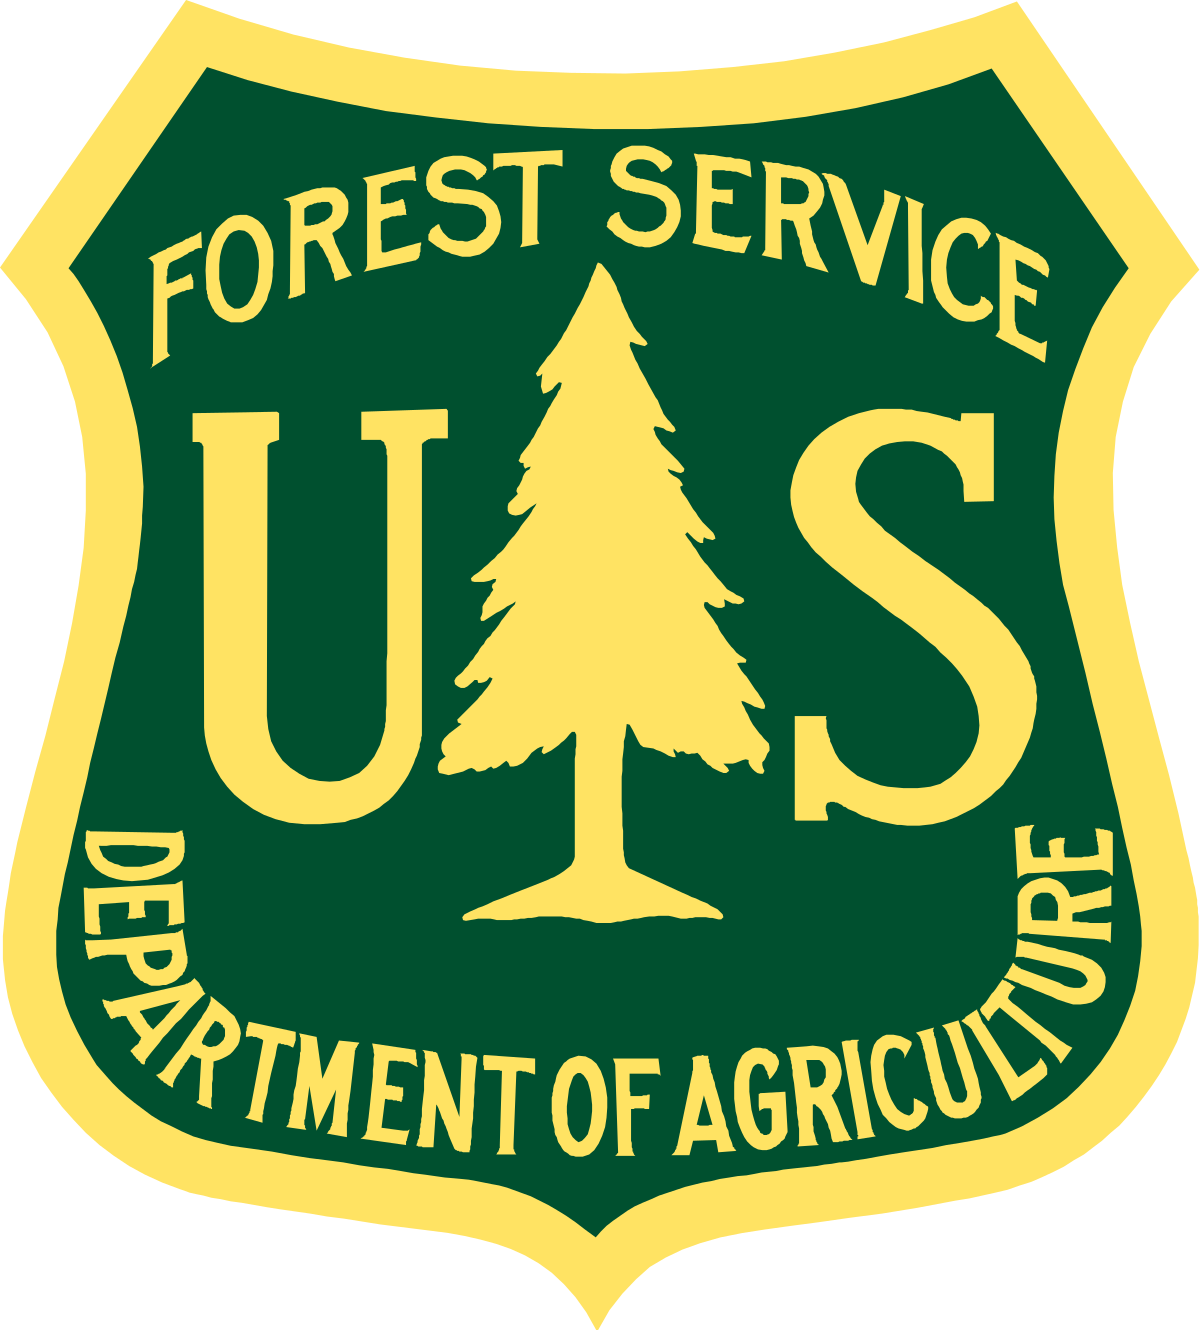 Logo_of_the_United_States_Forest_Service.svg.png